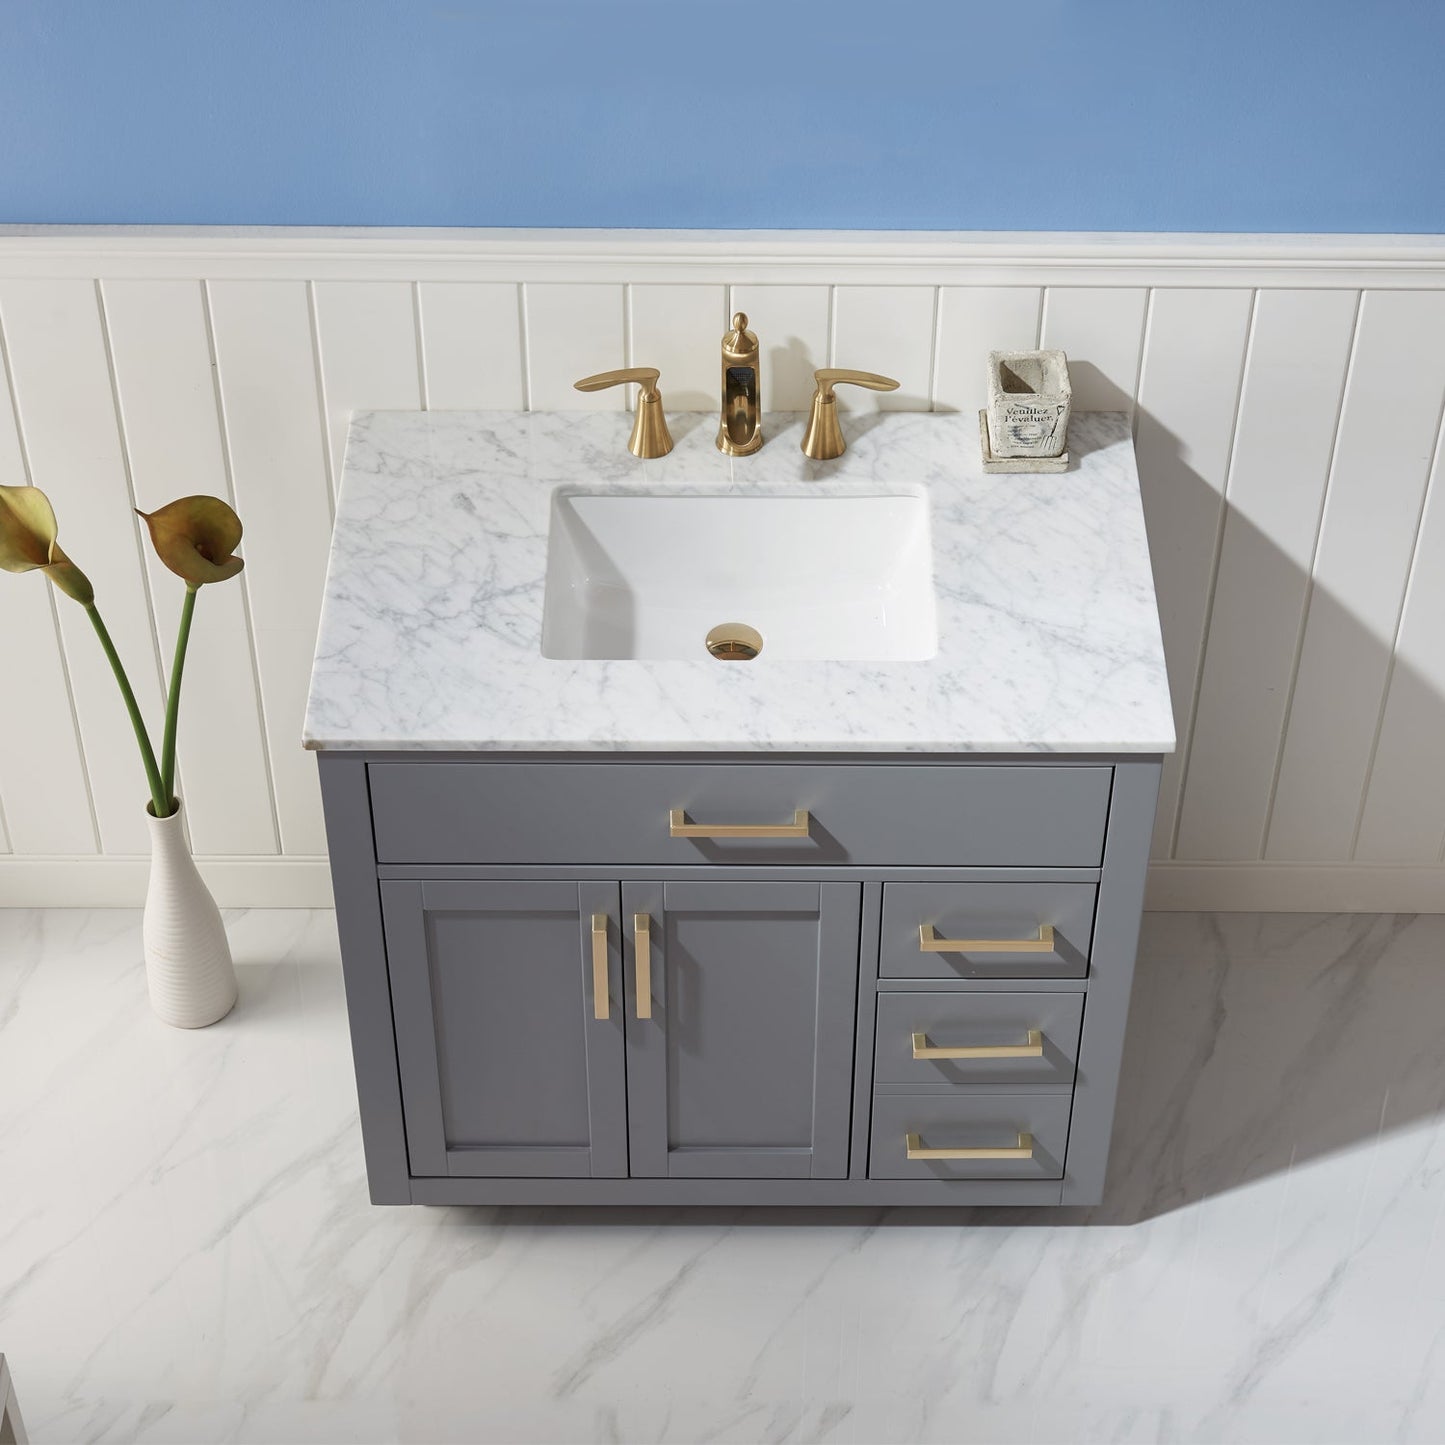 Ivy 36" Single Bathroom Vanity Set in Gray and Carrara White Marble Countertop without Mirror